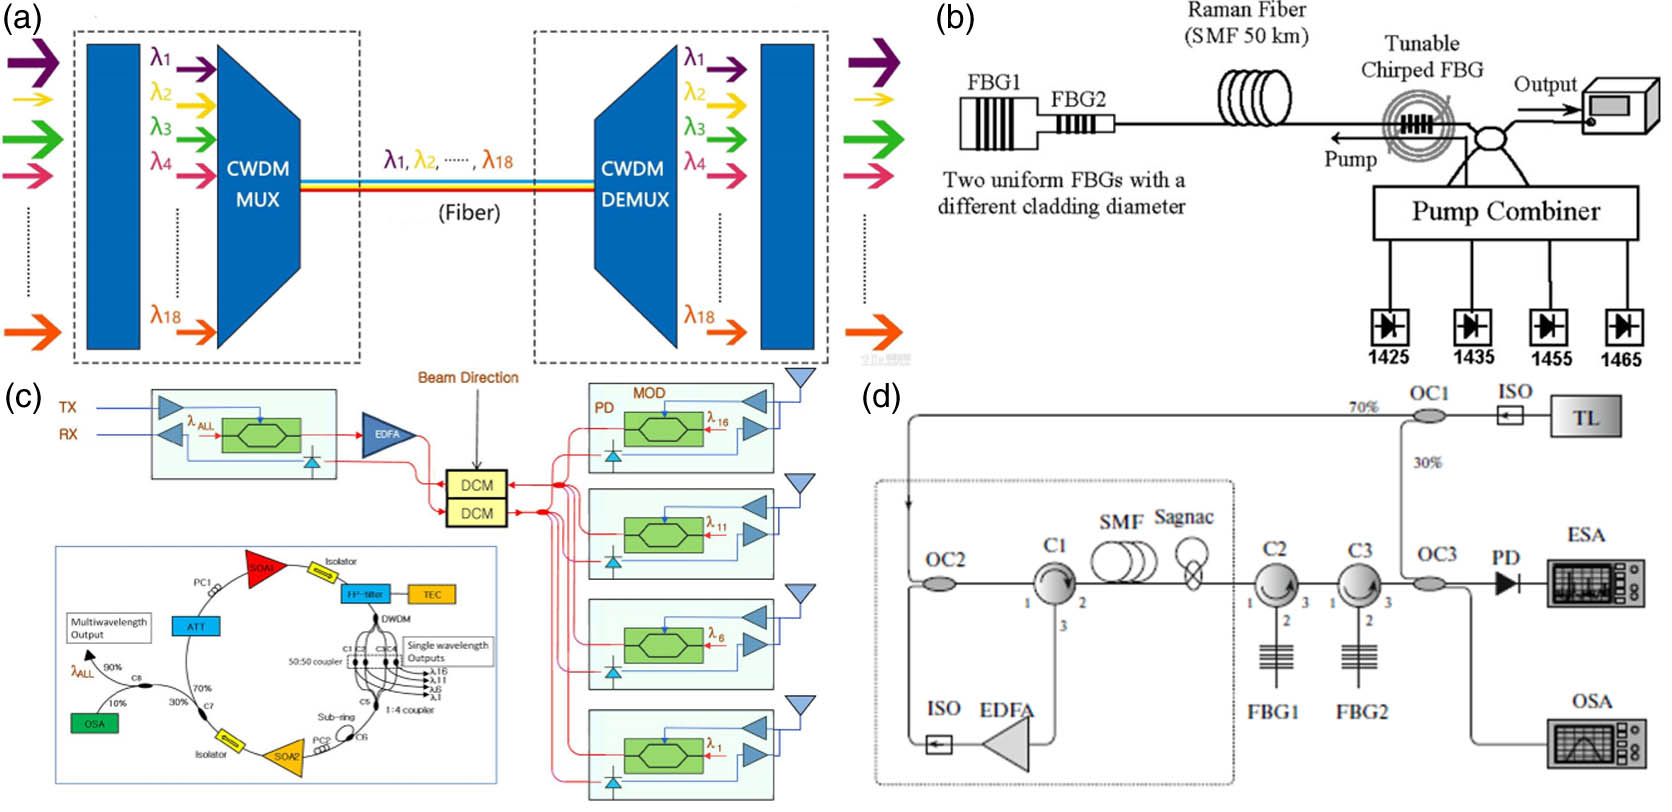 Applications of MWFL: (a) DWDM technology for an optical communication system, and (b) the multi-wavelength Raman fiber laser for long-distance simultaneous measurement of strain and temperature selected from Ref. [12]. (c) Phased array antenna system selected from Ref. [14]. (d) Microwave signal generation based on a multi-wavelength Brillouin fiber laser selected from Ref. [16].